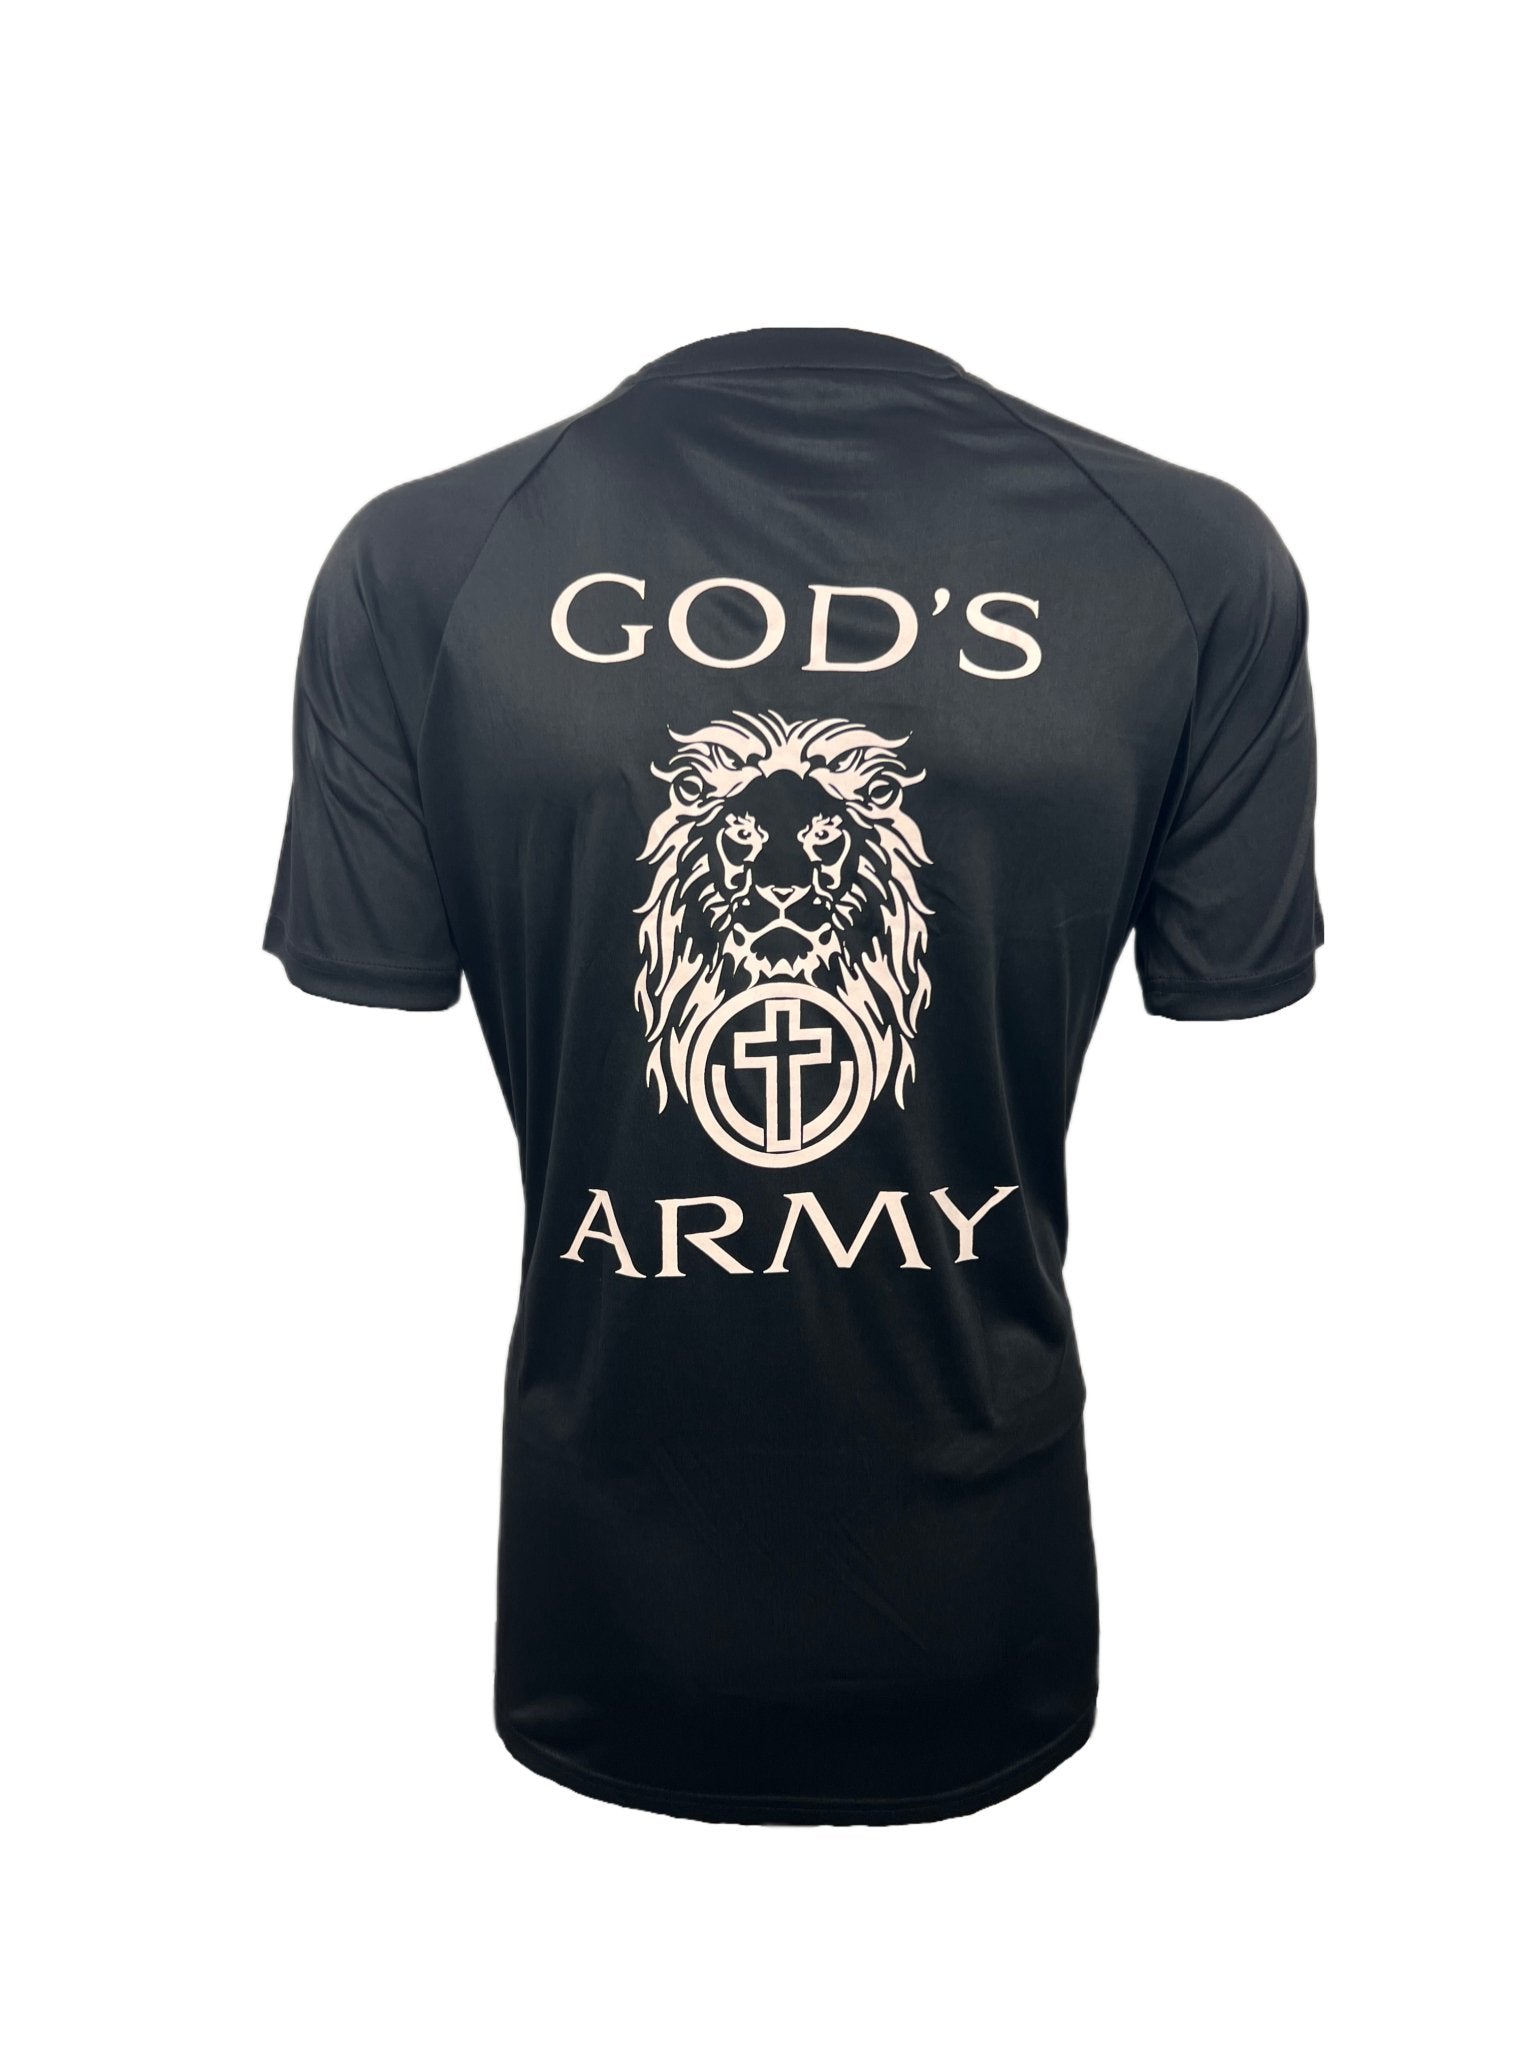 MEN’S GOD’S ARMY DRY-FIT TEE | MENS CHRISTIAN MOISTURE WICKING SHIRT - BLACK | ALPHAUNLEASHED - ALPHAunleashed